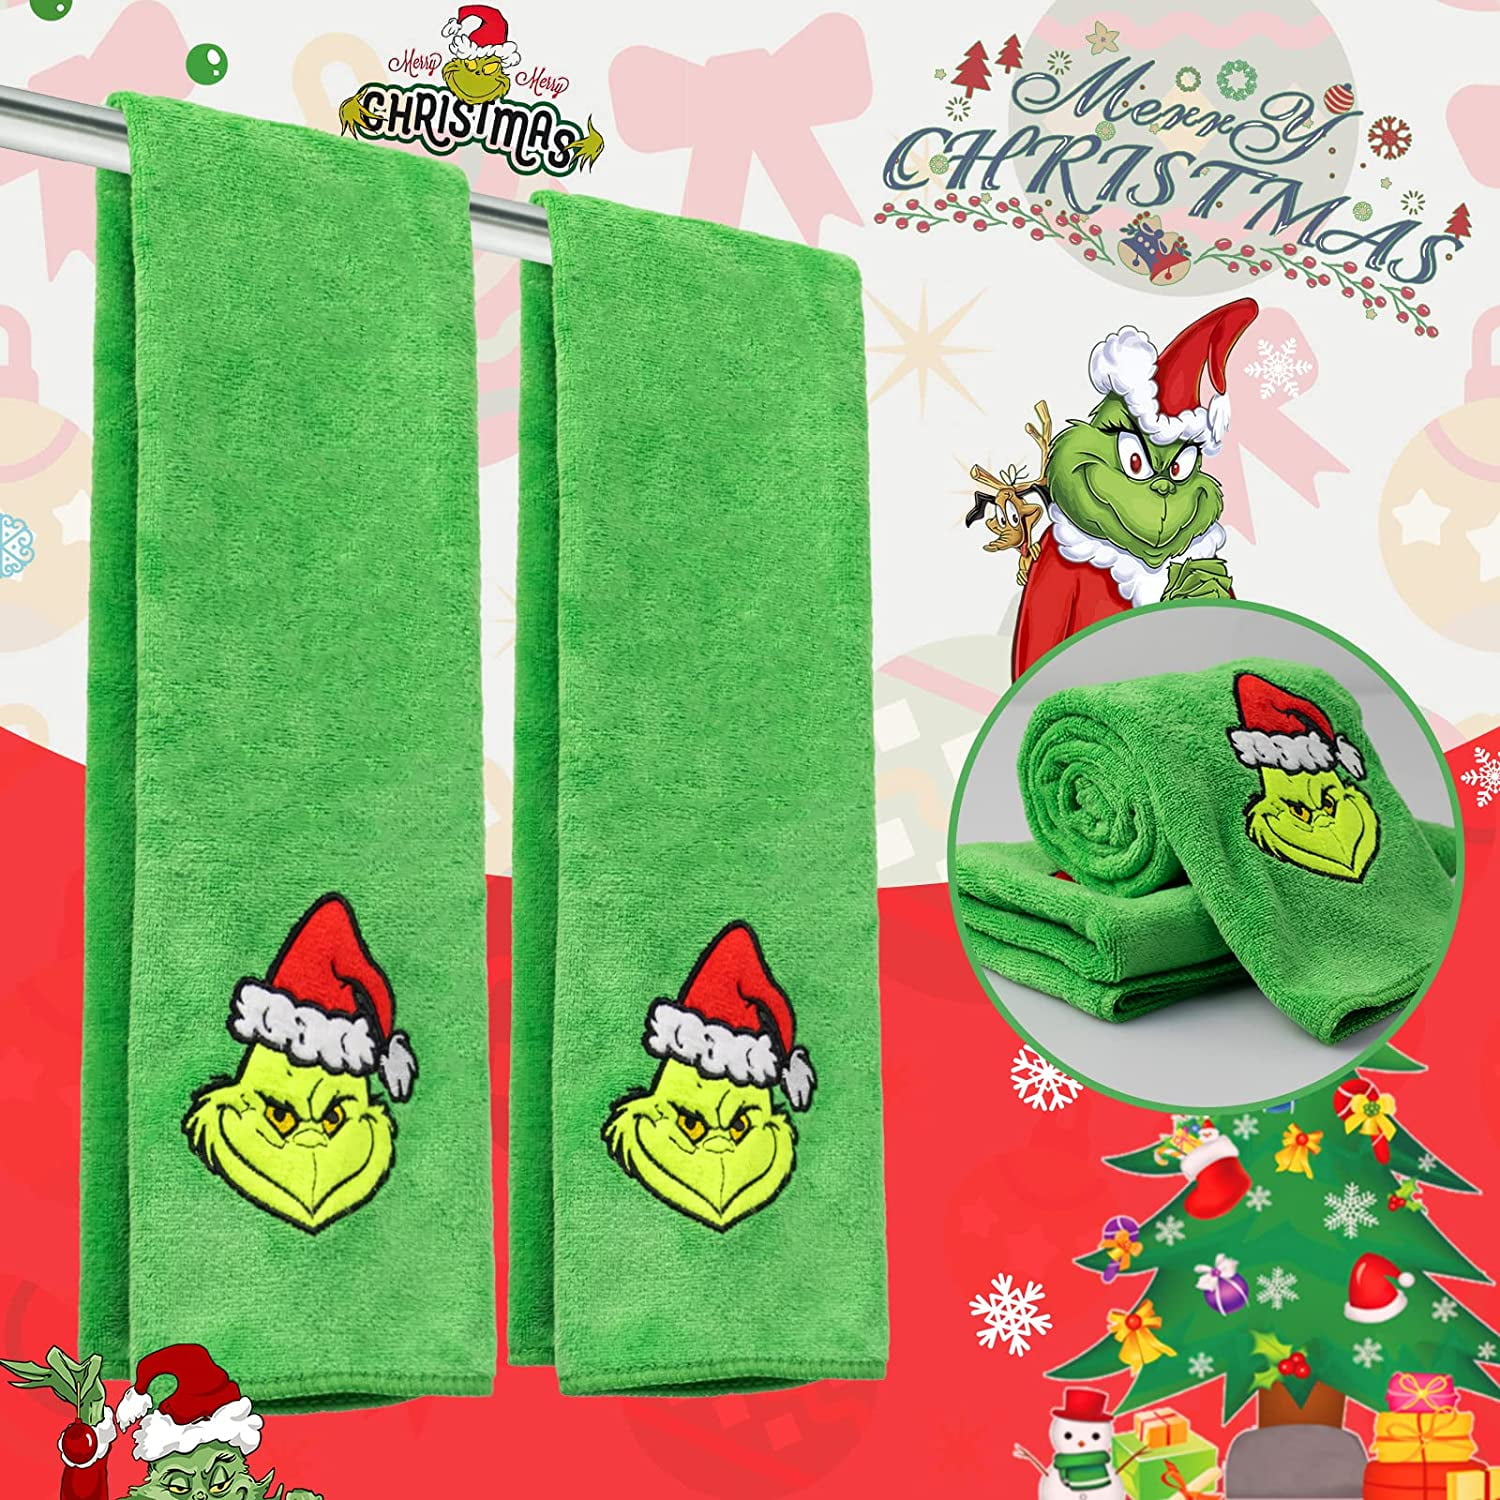 Imoment Christmas Grinch Hand Towels,2 Pack Grinch Kitchen Towels,Absorbent  Towels for Christmas Home Xmas Gifts for Women Men Kids 